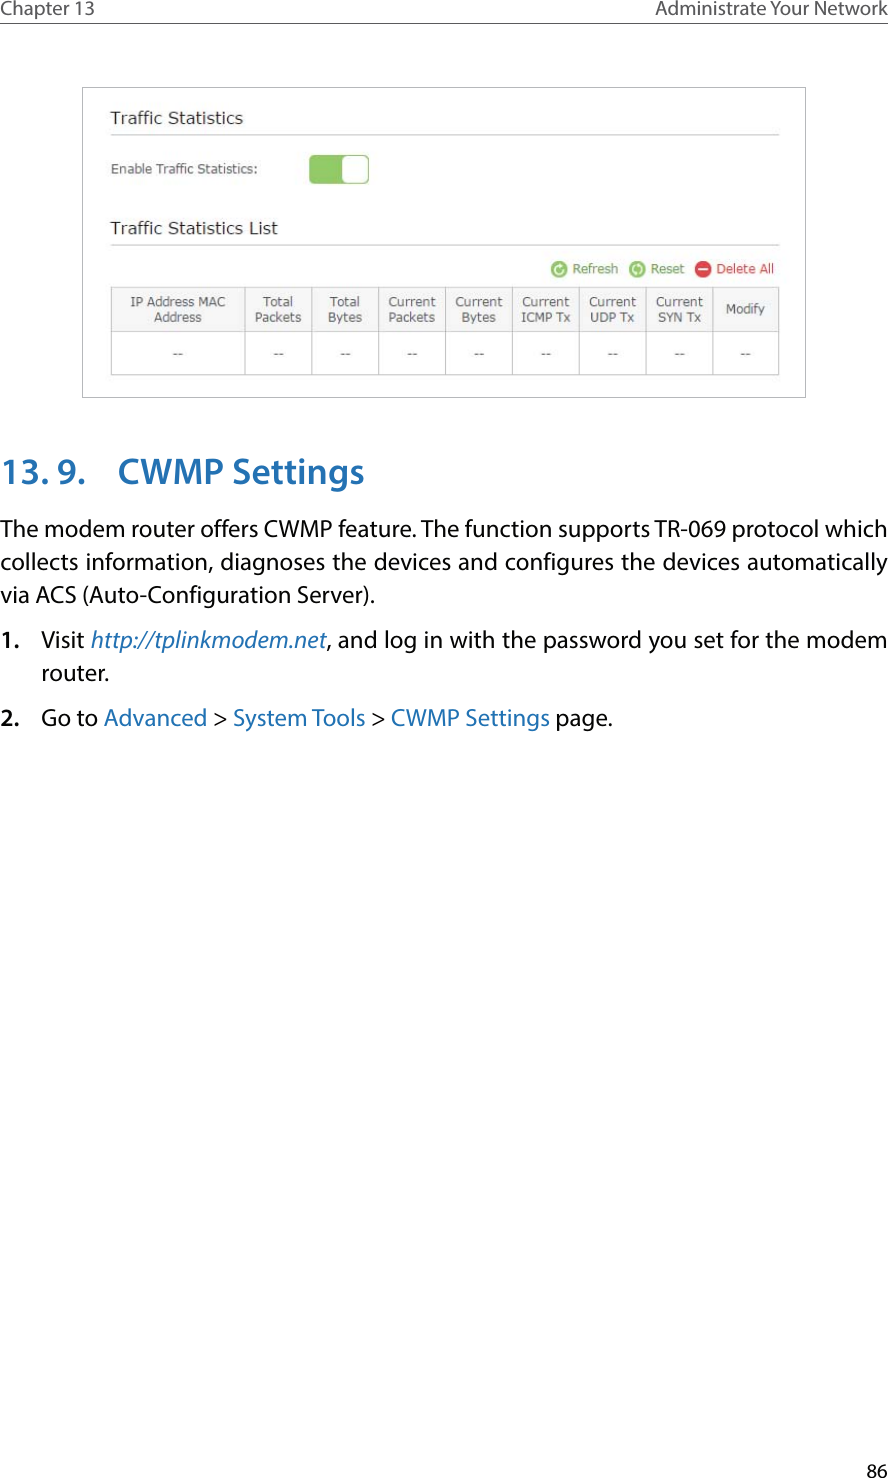 86Chapter 13 Administrate Your Network 13. 9.  CWMP SettingsThe modem router offers CWMP feature. The function supports TR-069 protocol which collects information, diagnoses the devices and configures the devices automatically via ACS (Auto-Configuration Server). 1.  Visit http://tplinkmodem.net, and log in with the password you set for the modem router.2.  Go to Advanced &gt; System Tools &gt; CWMP Settings page. 